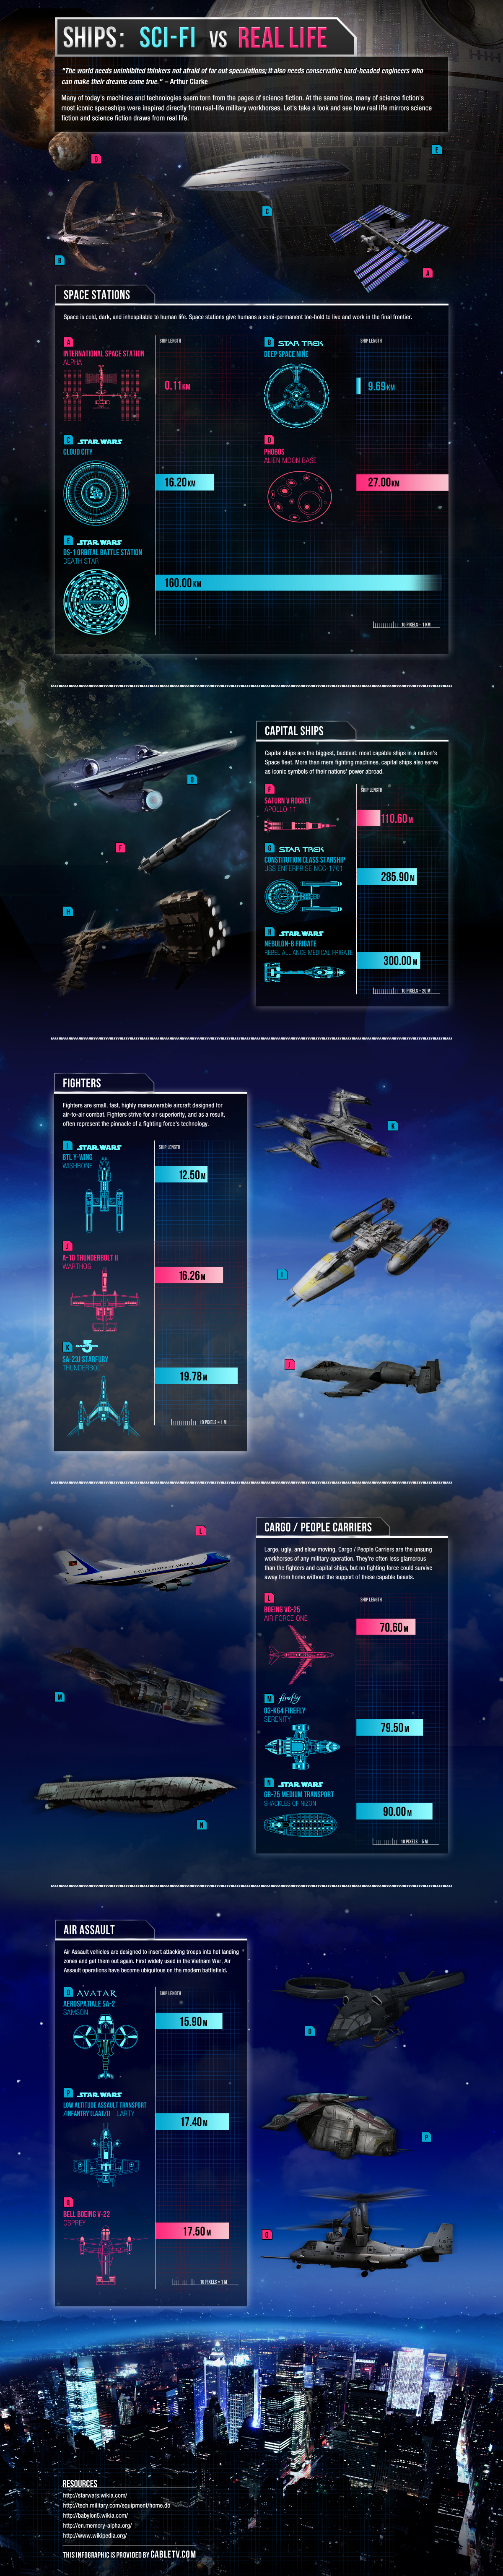 aircraft_infographic